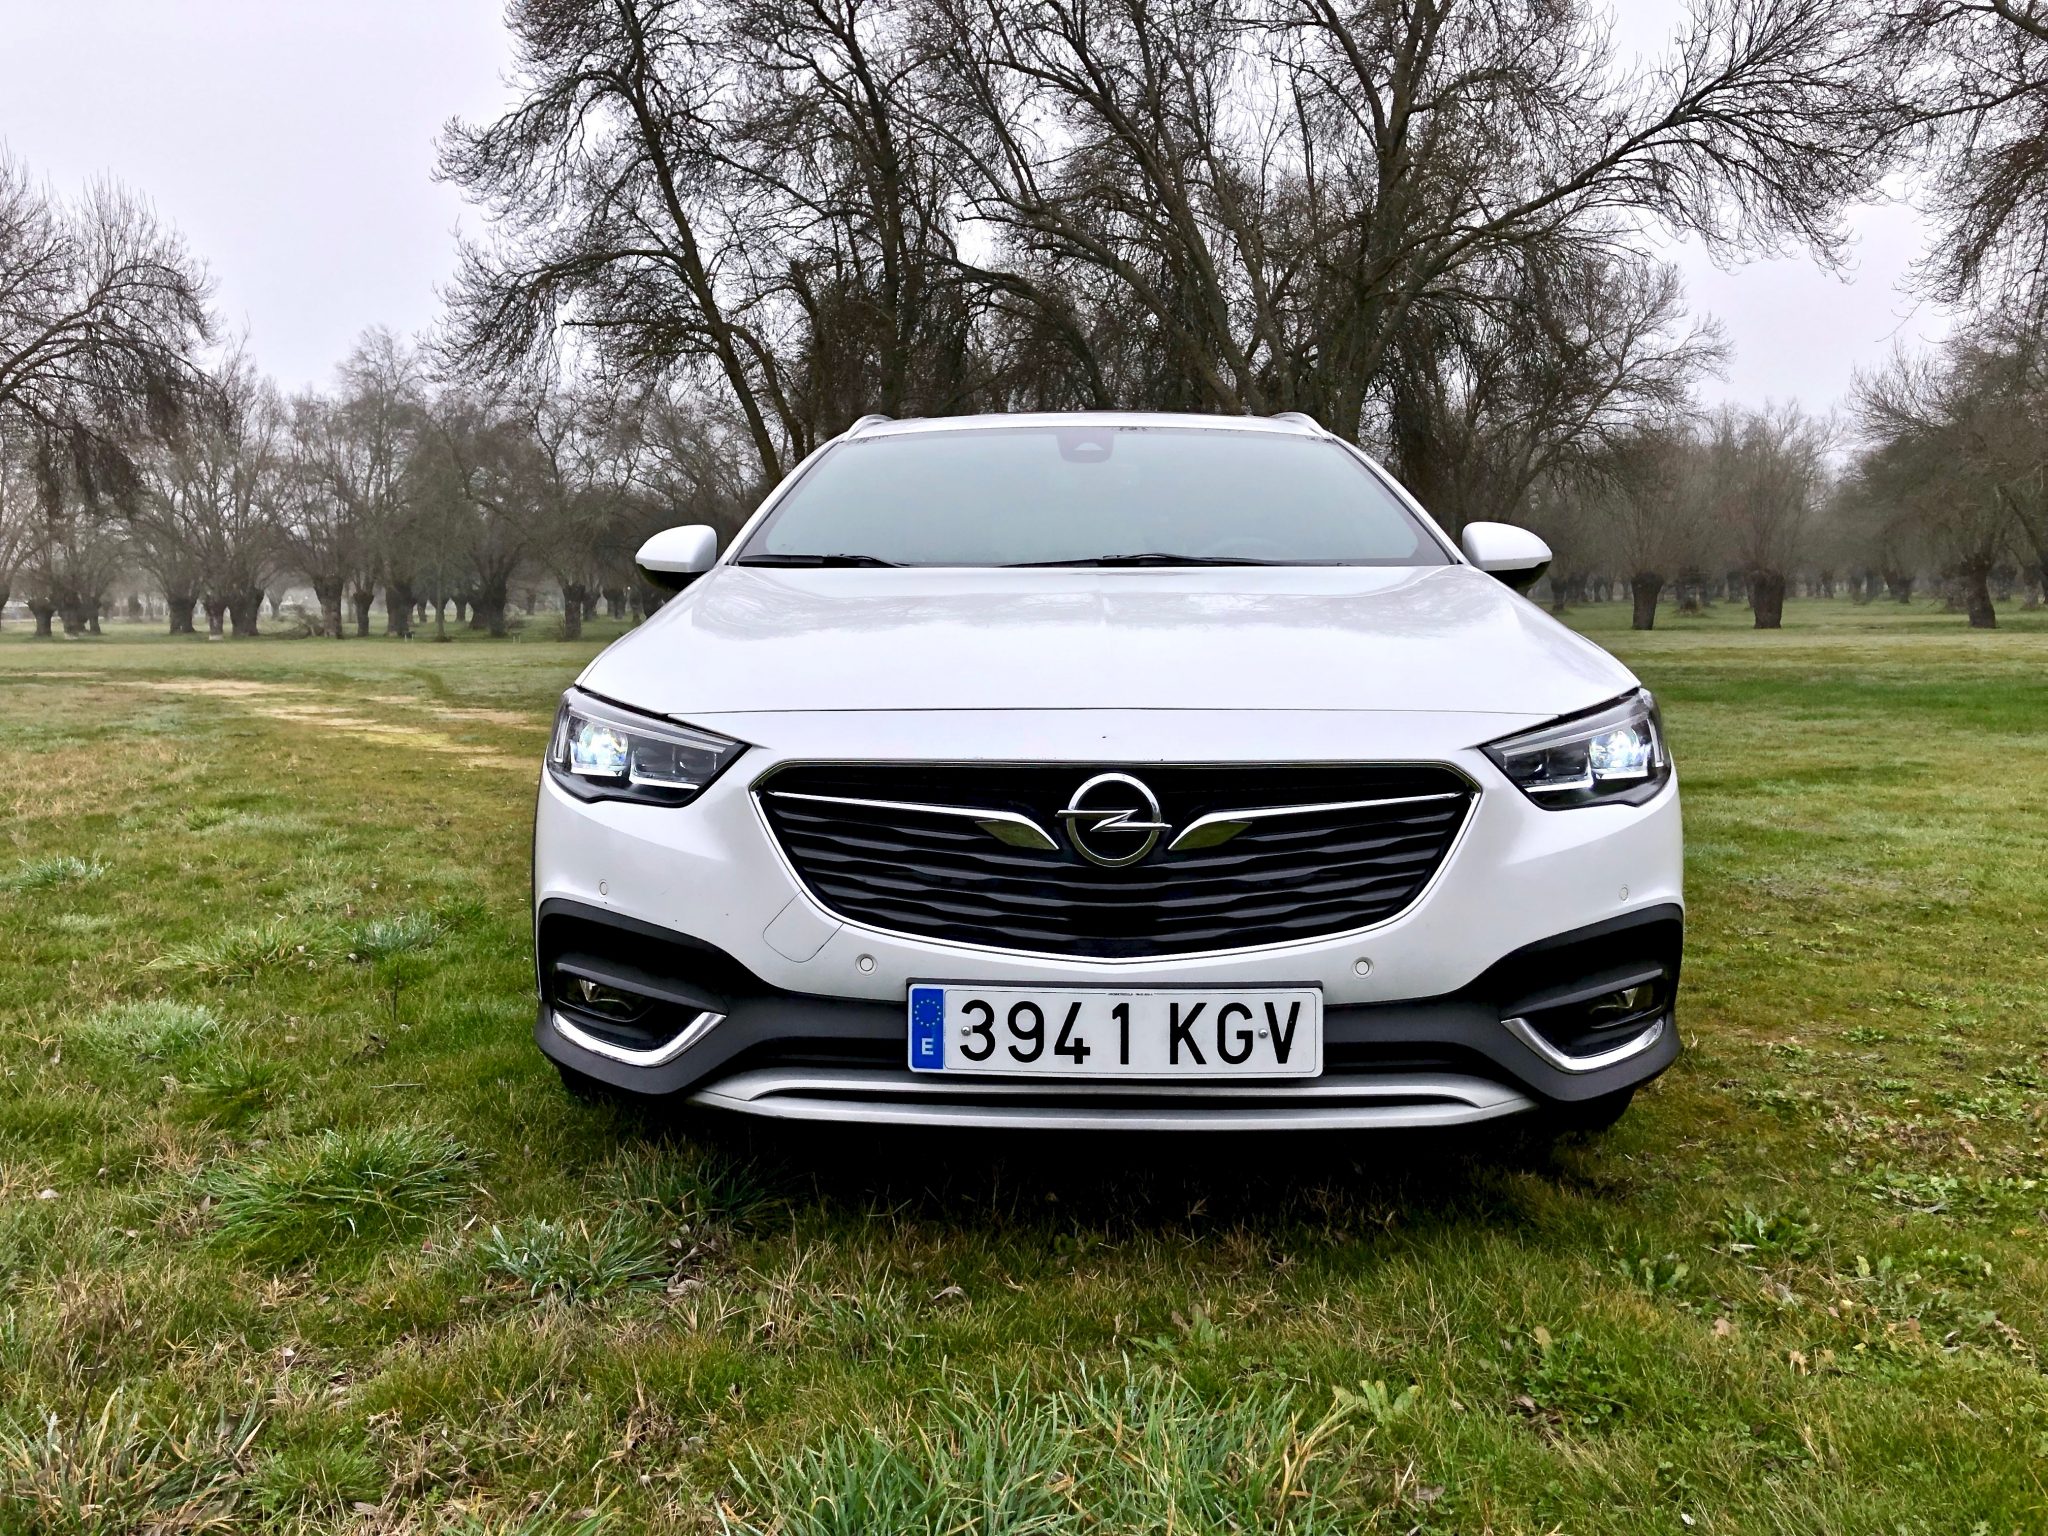 Frontal Insignia CT - Opel Insignia Country Tourer 2.0 Turbo 260 CV